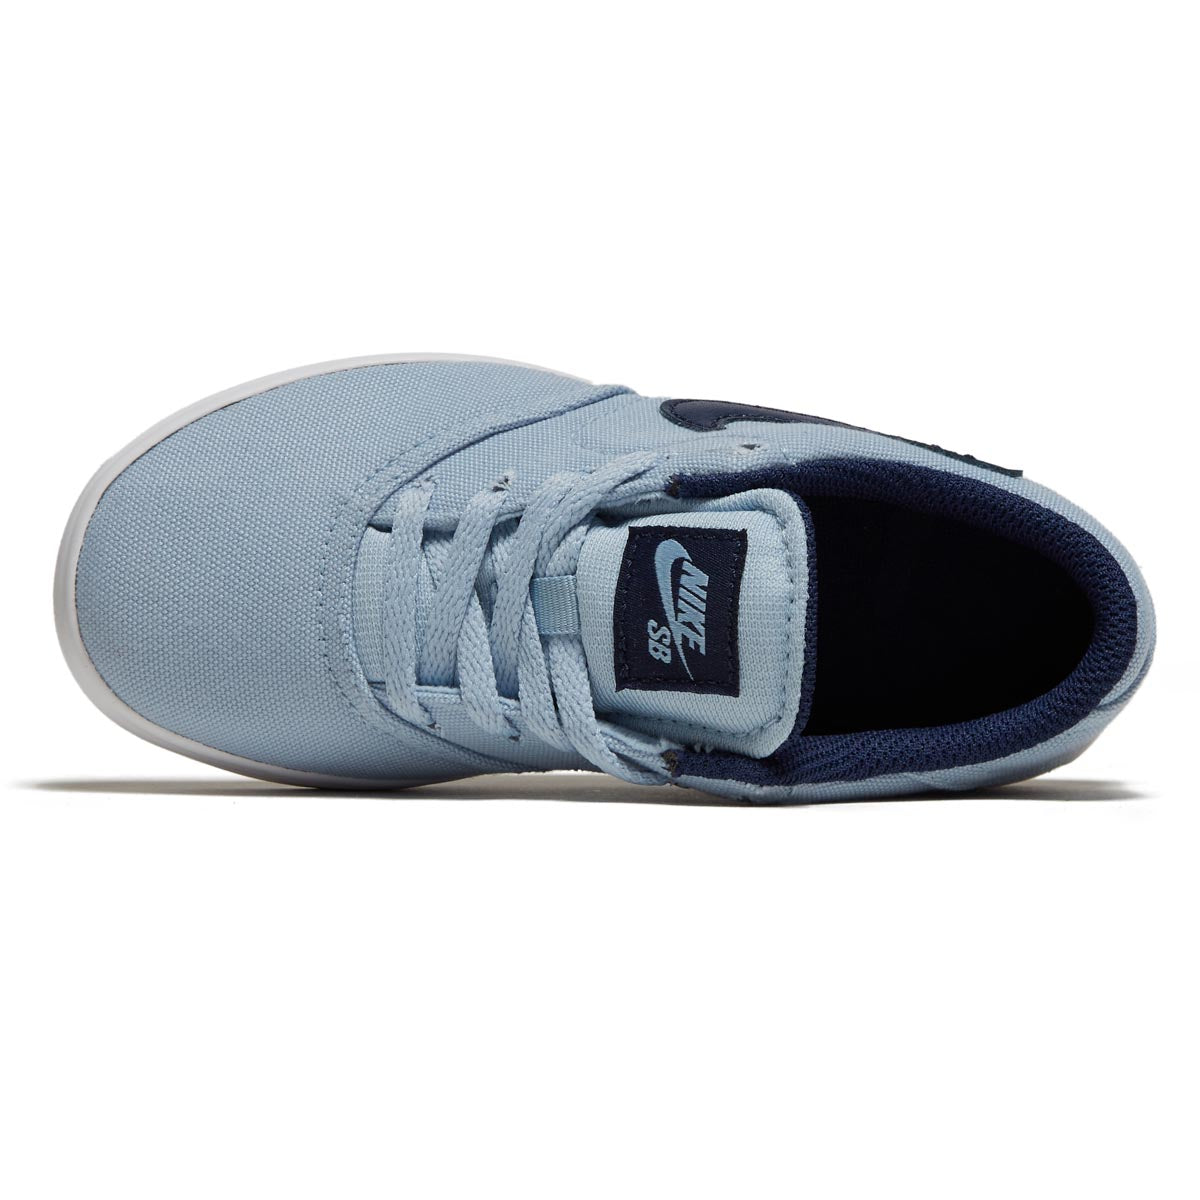 Nike SB Youth Check Canvas Shoes - Light Armory Blue/Midnight Navy/White/White image 2